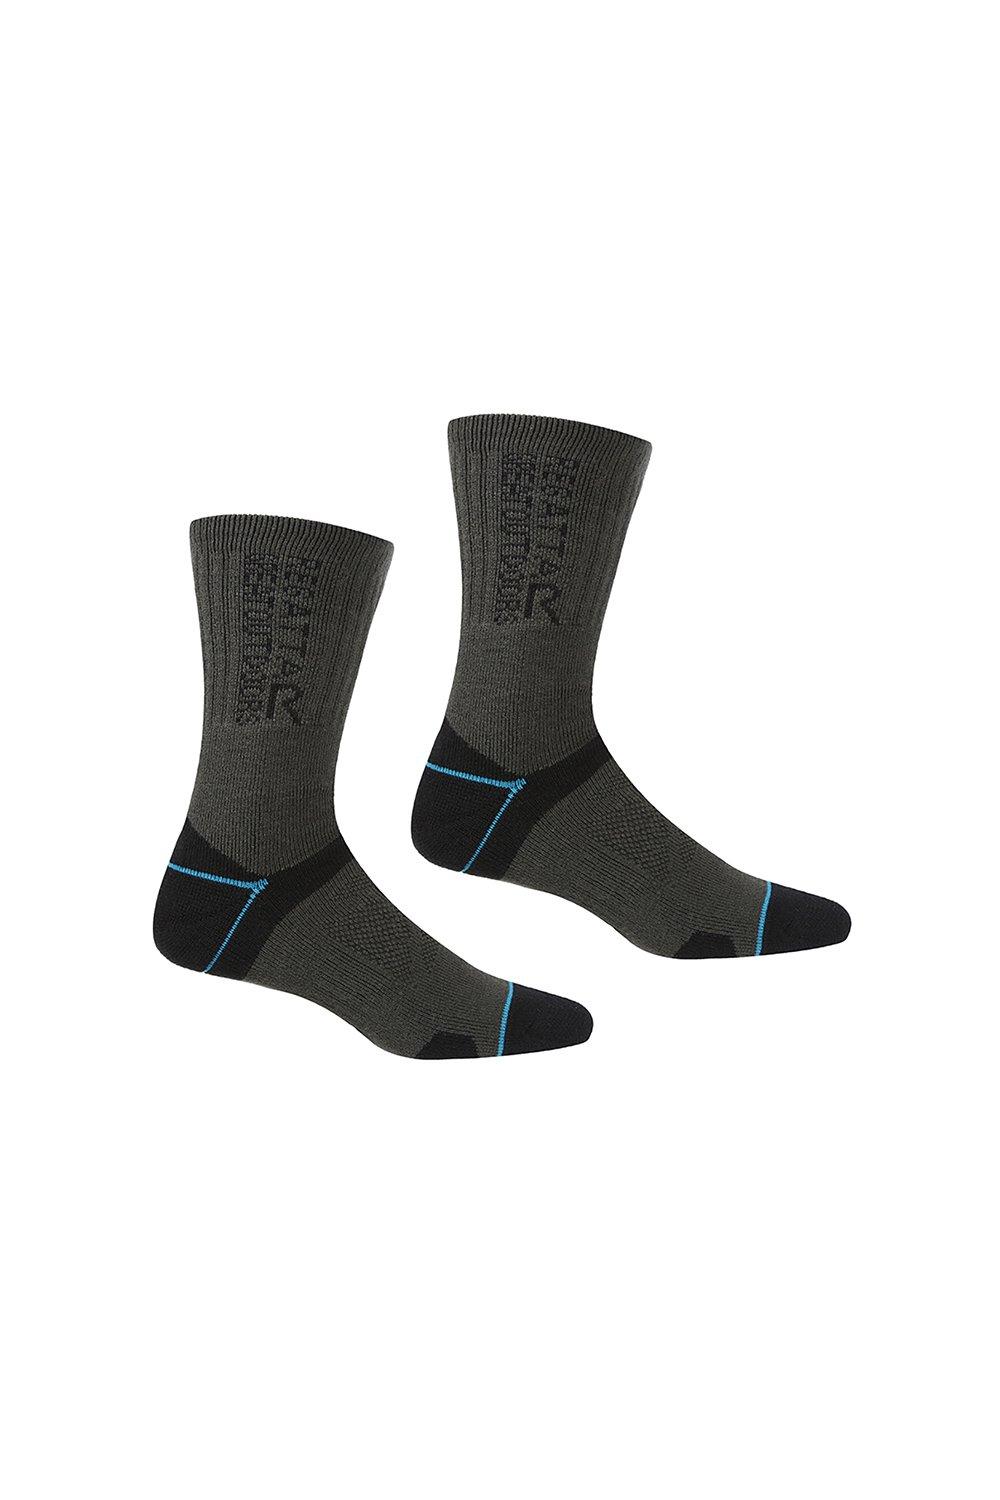 'Blister Protection II' Antibacterial Acrylic Two-Pair Pack Socks